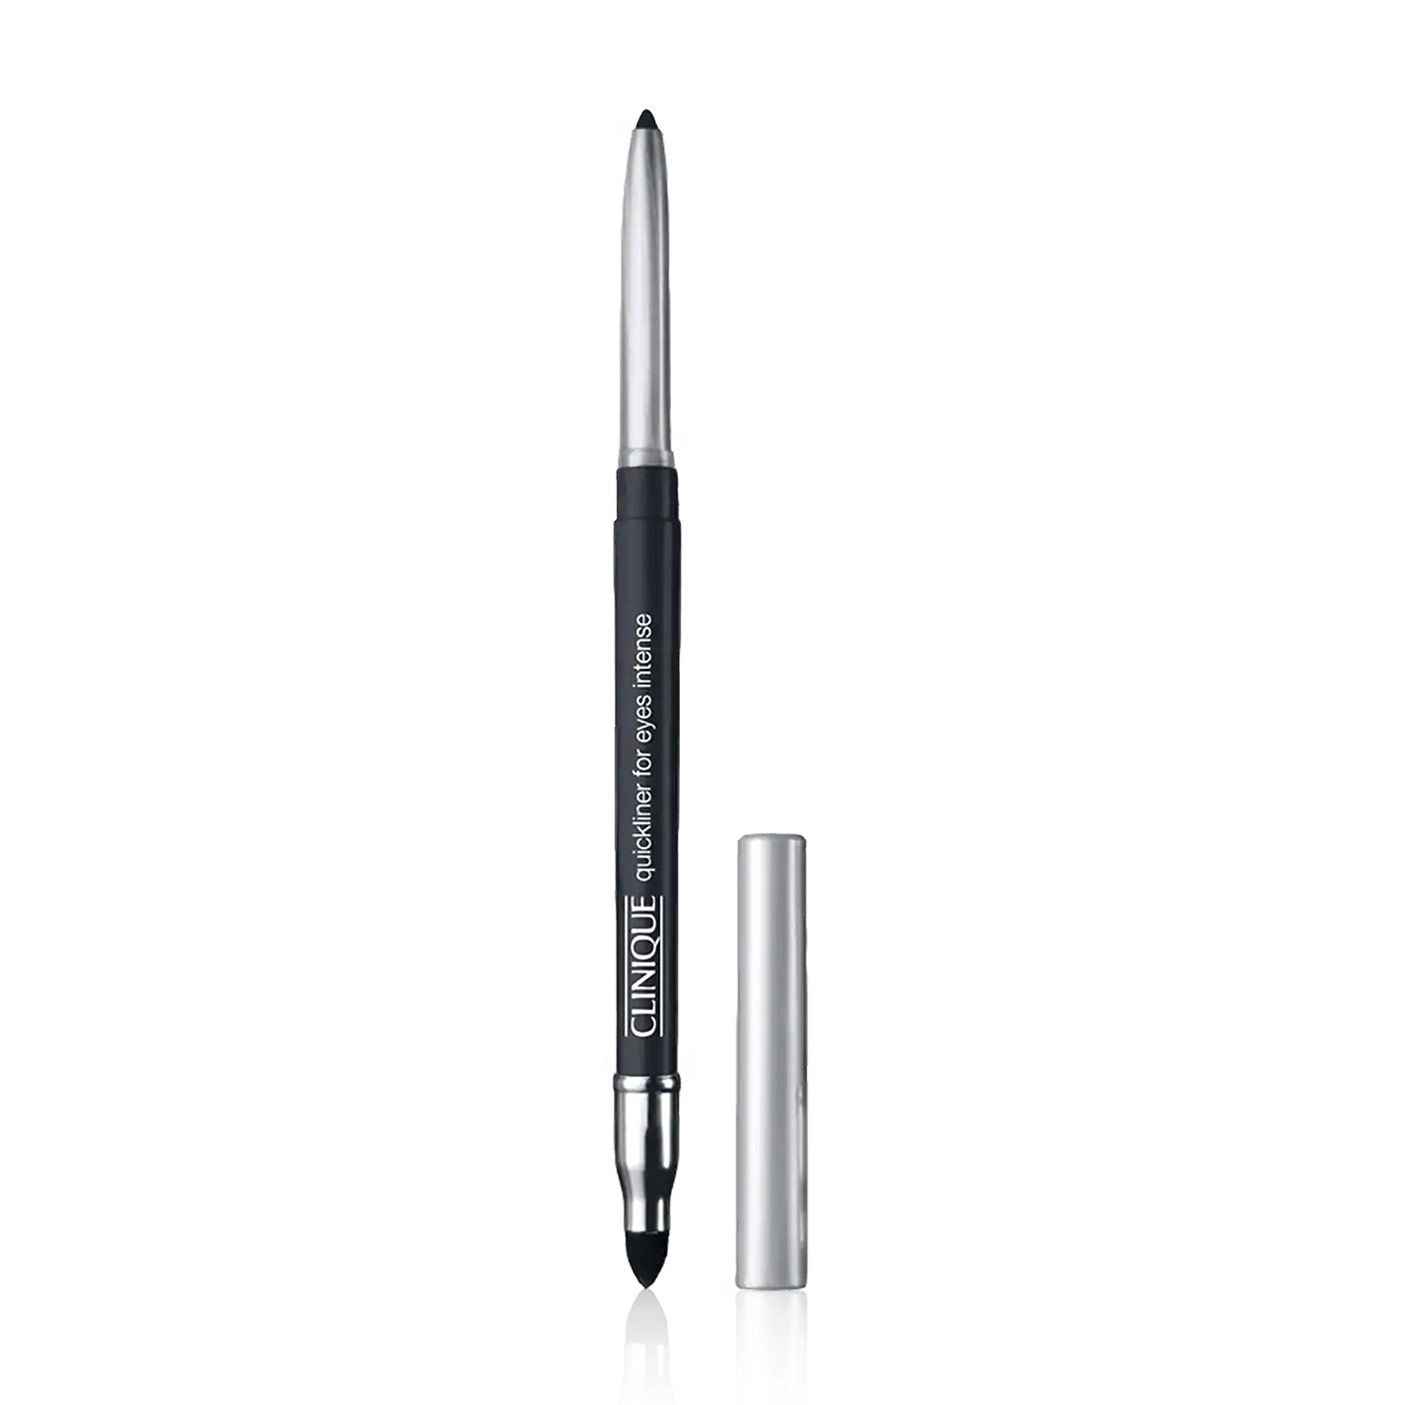 Clinique Карандаш для глаз Quickliner For Eyes Intense 05 Intense Charcoal, 0.28 г - фото N1